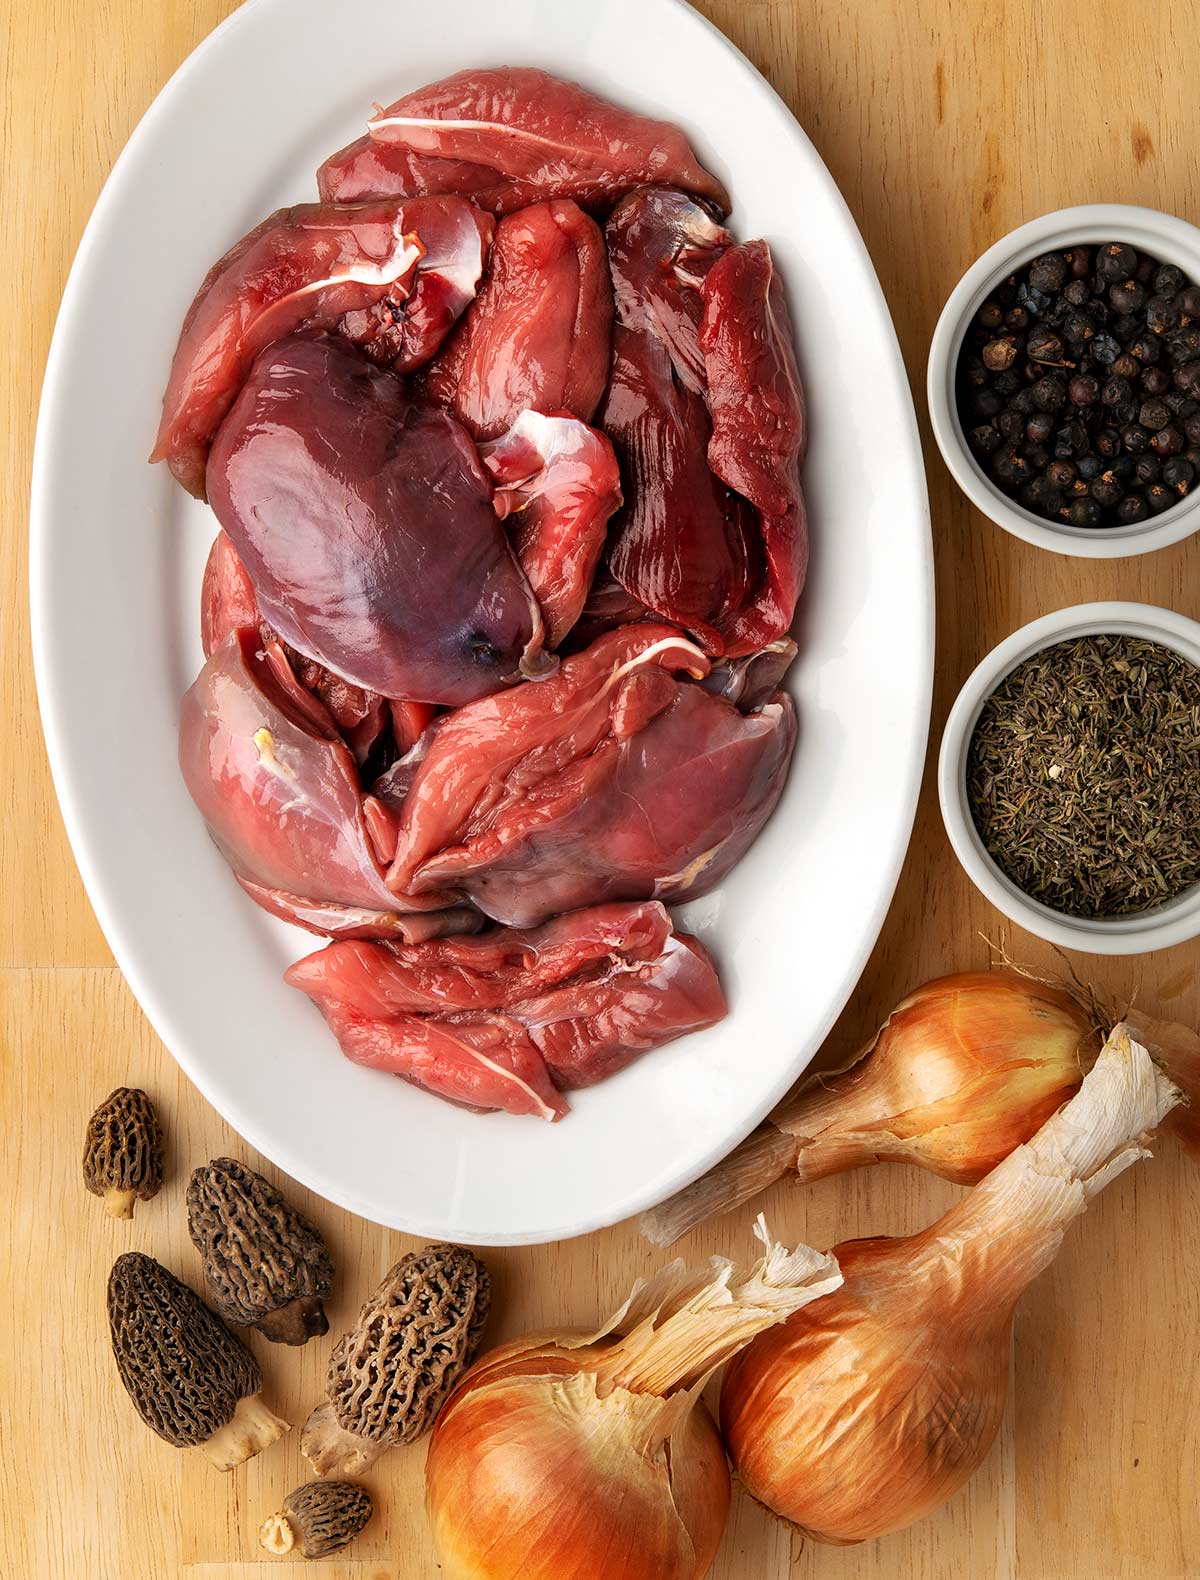 Ingredients for a game pie: grouse, onions, mushrooms and herbs. 